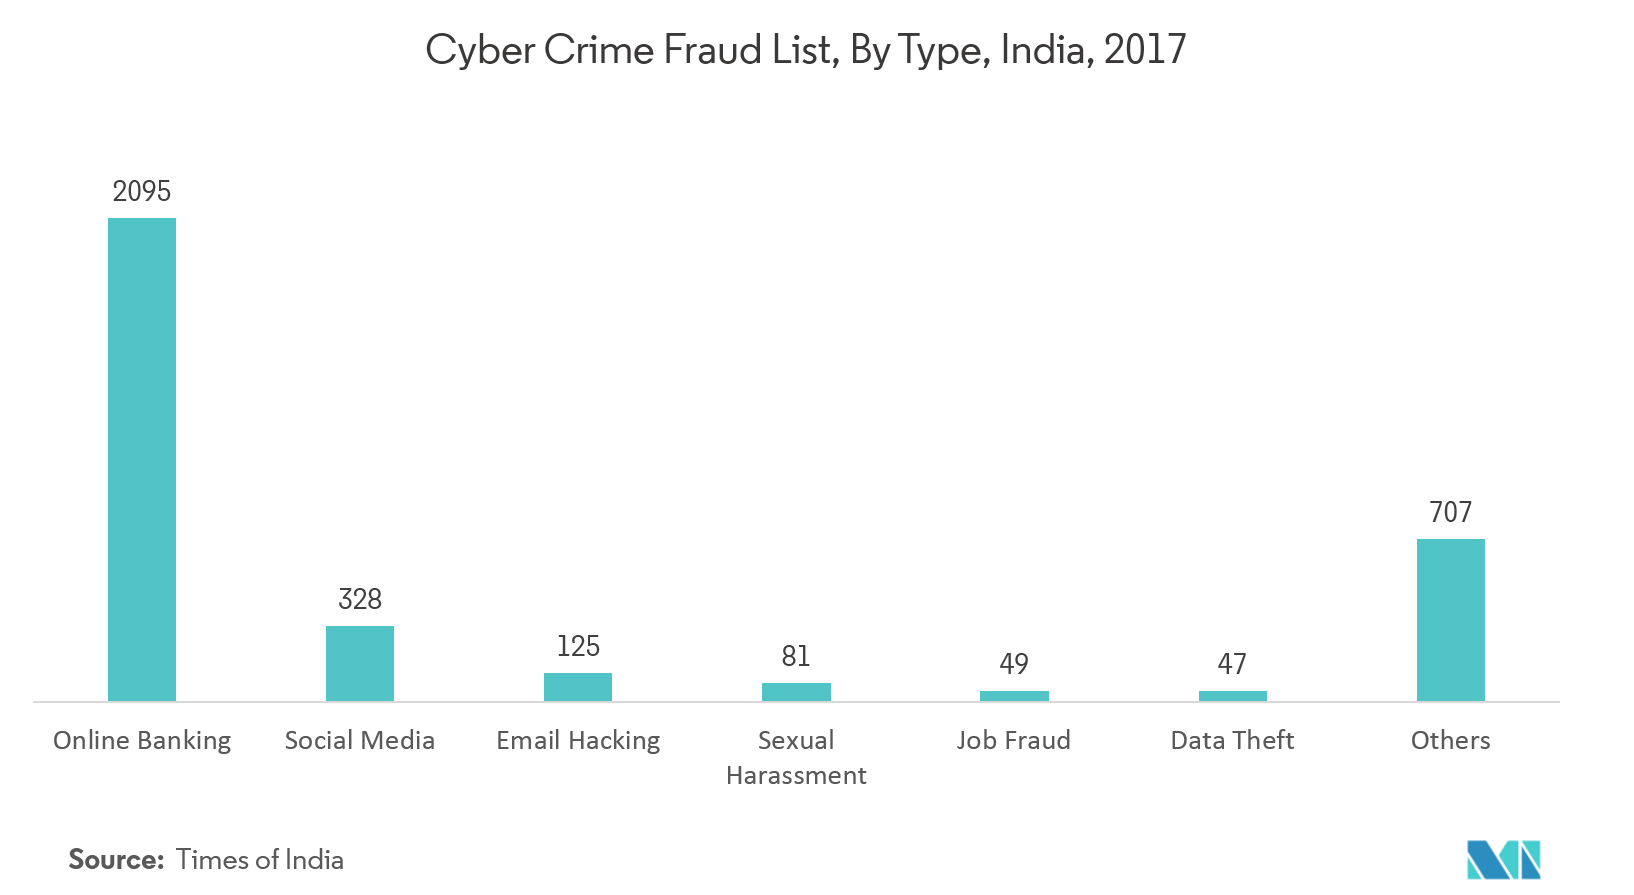 Proactive Security Market: Cyber Crime Fraud List, By Type, India, 2017